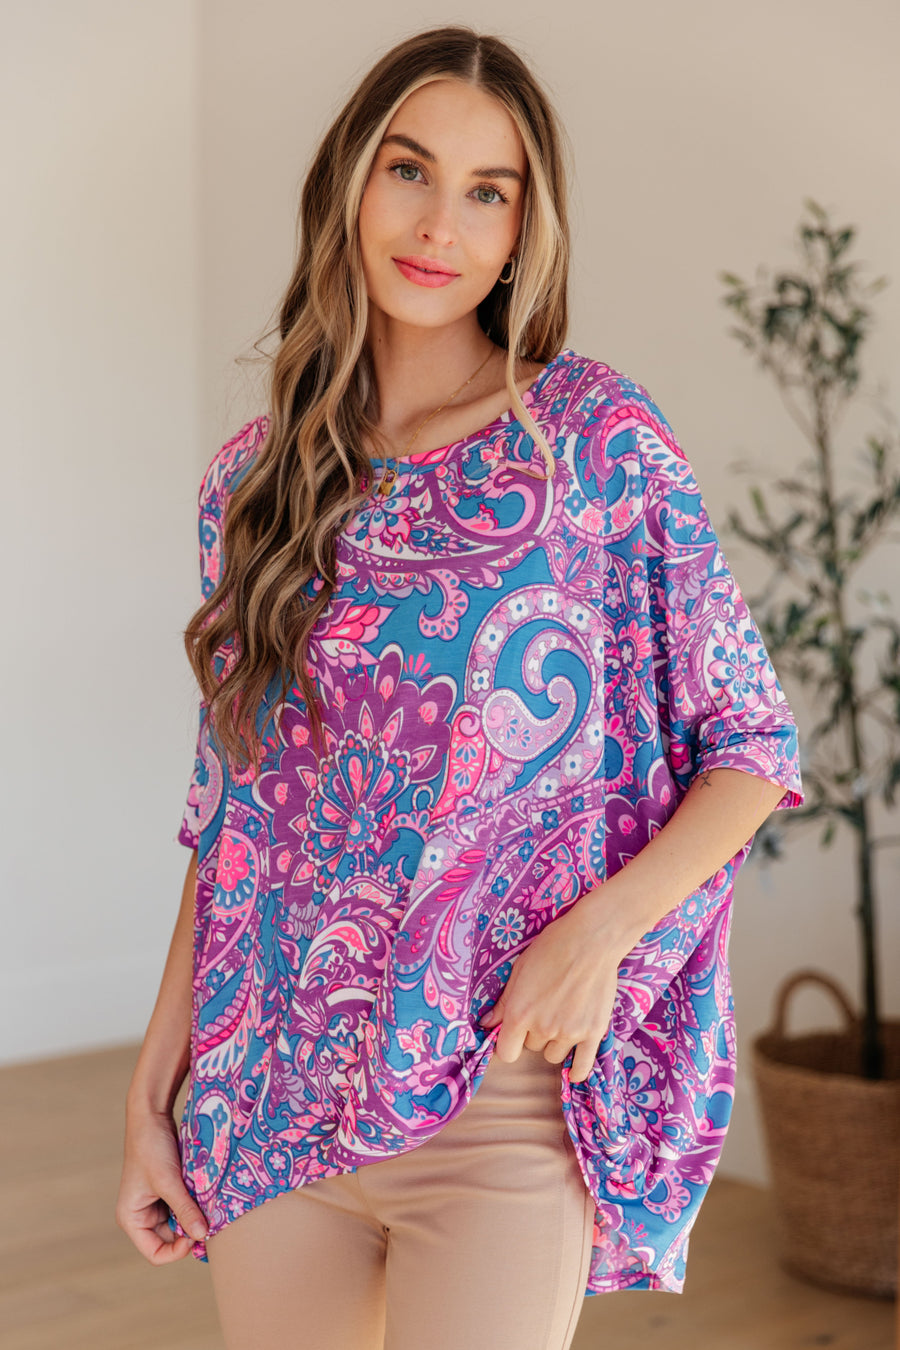 Essential Blouse in Purple Paisley